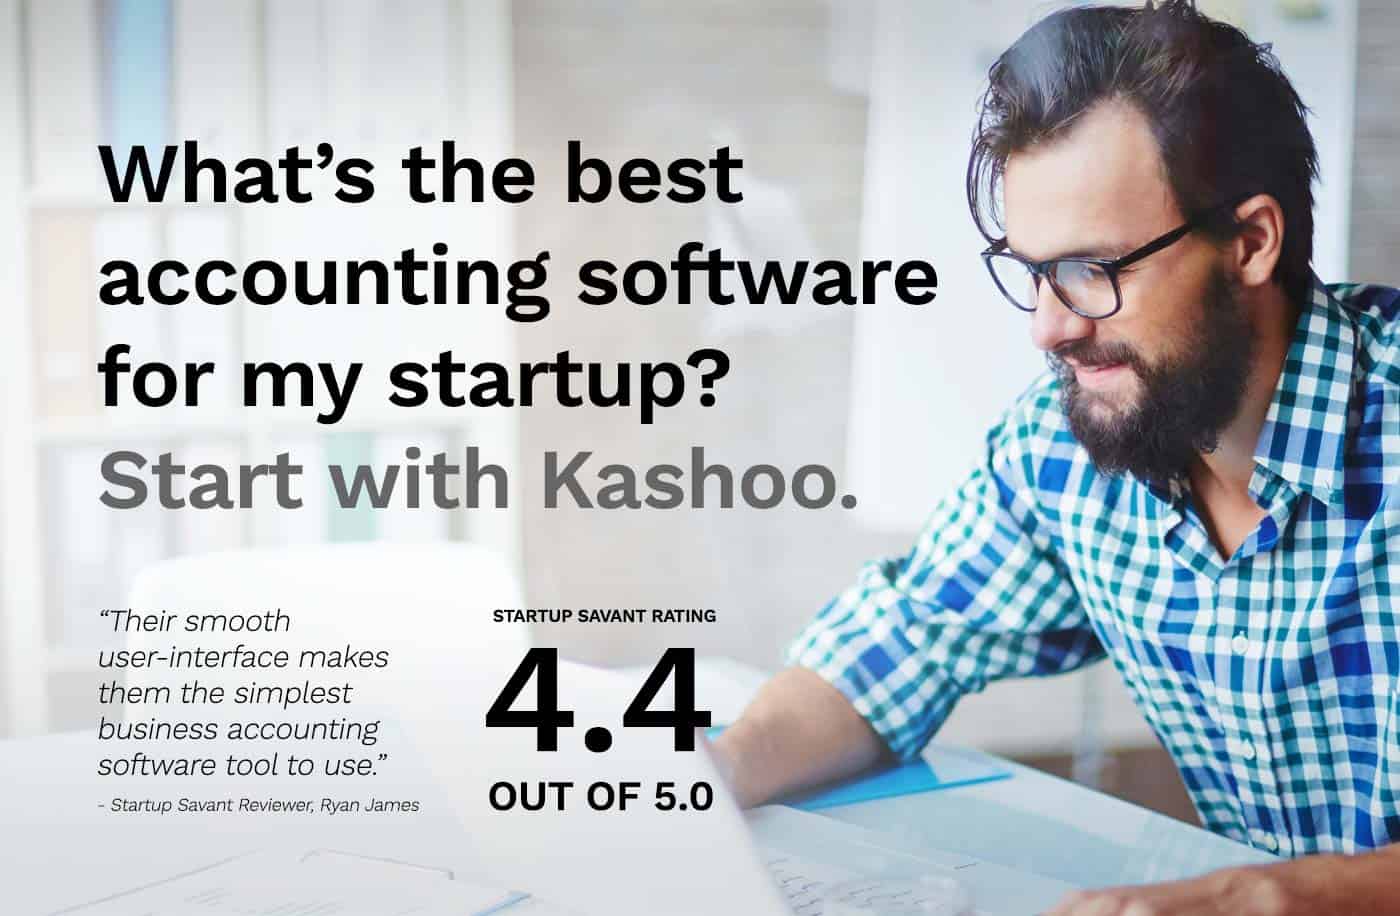 Kashoo was rated 4.4/5 for best accounting software for your startup!